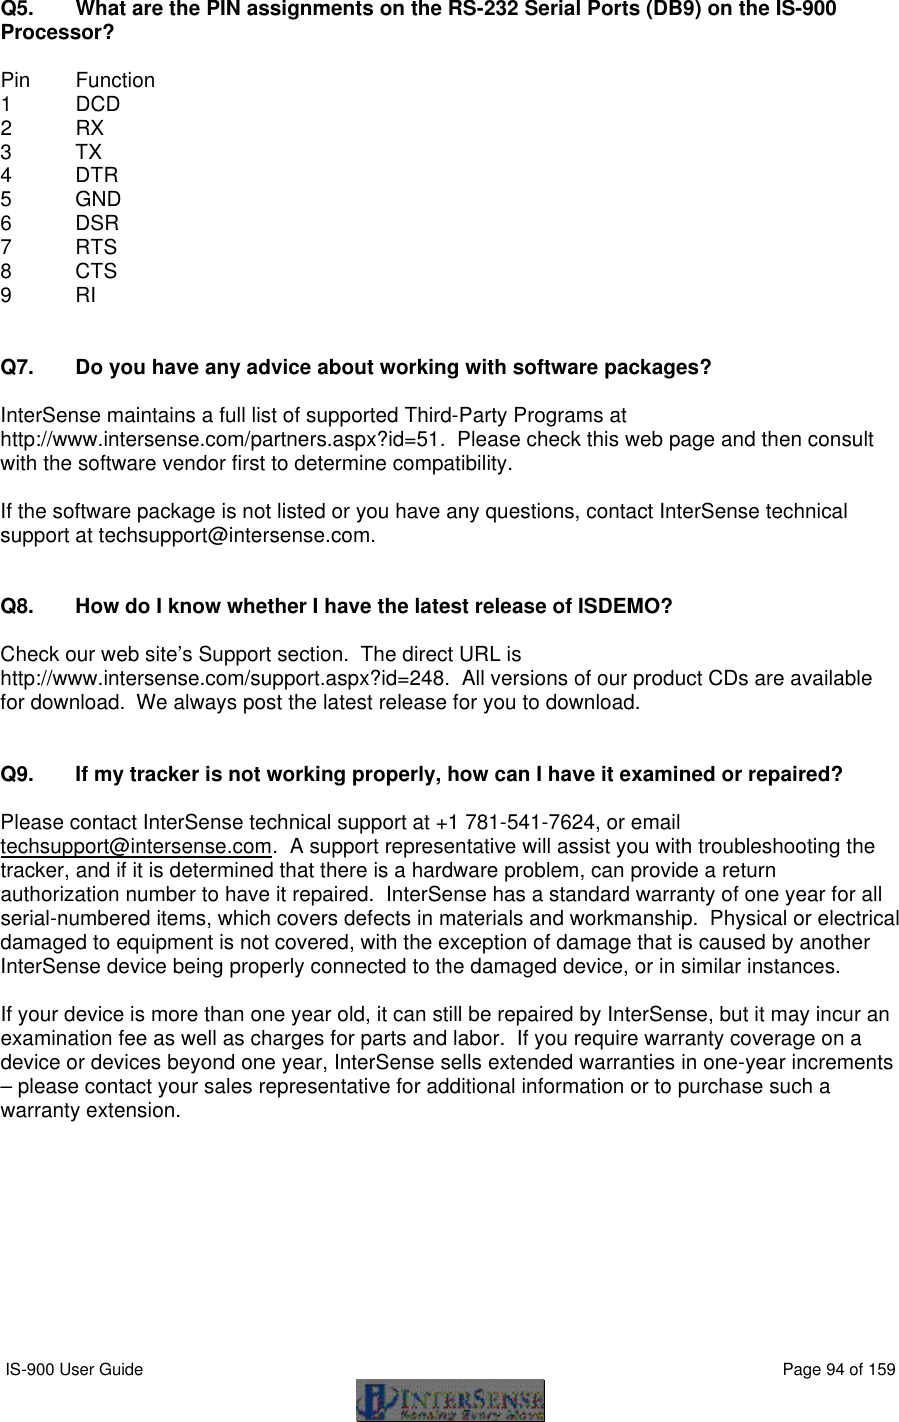  IS-900 User Guide                                                                                                                                          Page 94 of 159  Q5. What are the PIN assignments on the RS-232 Serial Ports (DB9) on the IS-900 Processor?  Pin Function 1 DCD 2 RX 3 TX 4 DTR 5 GND 6 DSR 7 RTS   8 CTS 9 RI   Q7. Do you have any advice about working with software packages?  InterSense maintains a full list of supported Third-Party Programs at http://www.intersense.com/partners.aspx?id=51.  Please check this web page and then consult with the software vendor first to determine compatibility.    If the software package is not listed or you have any questions, contact InterSense technical support at techsupport@intersense.com.     Q8. How do I know whether I have the latest release of ISDEMO?  Check our web site’s Support section.  The direct URL is http://www.intersense.com/support.aspx?id=248.  All versions of our product CDs are available for download.  We always post the latest release for you to download.   Q9. If my tracker is not working properly, how can I have it examined or repaired?  Please contact InterSense technical support at +1 781-541-7624, or email techsupport@intersense.com.  A support representative will assist you with troubleshooting the tracker, and if it is determined that there is a hardware problem, can provide a return authorization number to have it repaired.  InterSense has a standard warranty of one year for all serial-numbered items, which covers defects in materials and workmanship.  Physical or electrical damaged to equipment is not covered, with the exception of damage that is caused by another InterSense device being properly connected to the damaged device, or in similar instances.  If your device is more than one year old, it can still be repaired by InterSense, but it may incur an examination fee as well as charges for parts and labor.  If you require warranty coverage on a device or devices beyond one year, InterSense sells extended warranties in one-year increments – please contact your sales representative for additional information or to purchase such a warranty extension. 